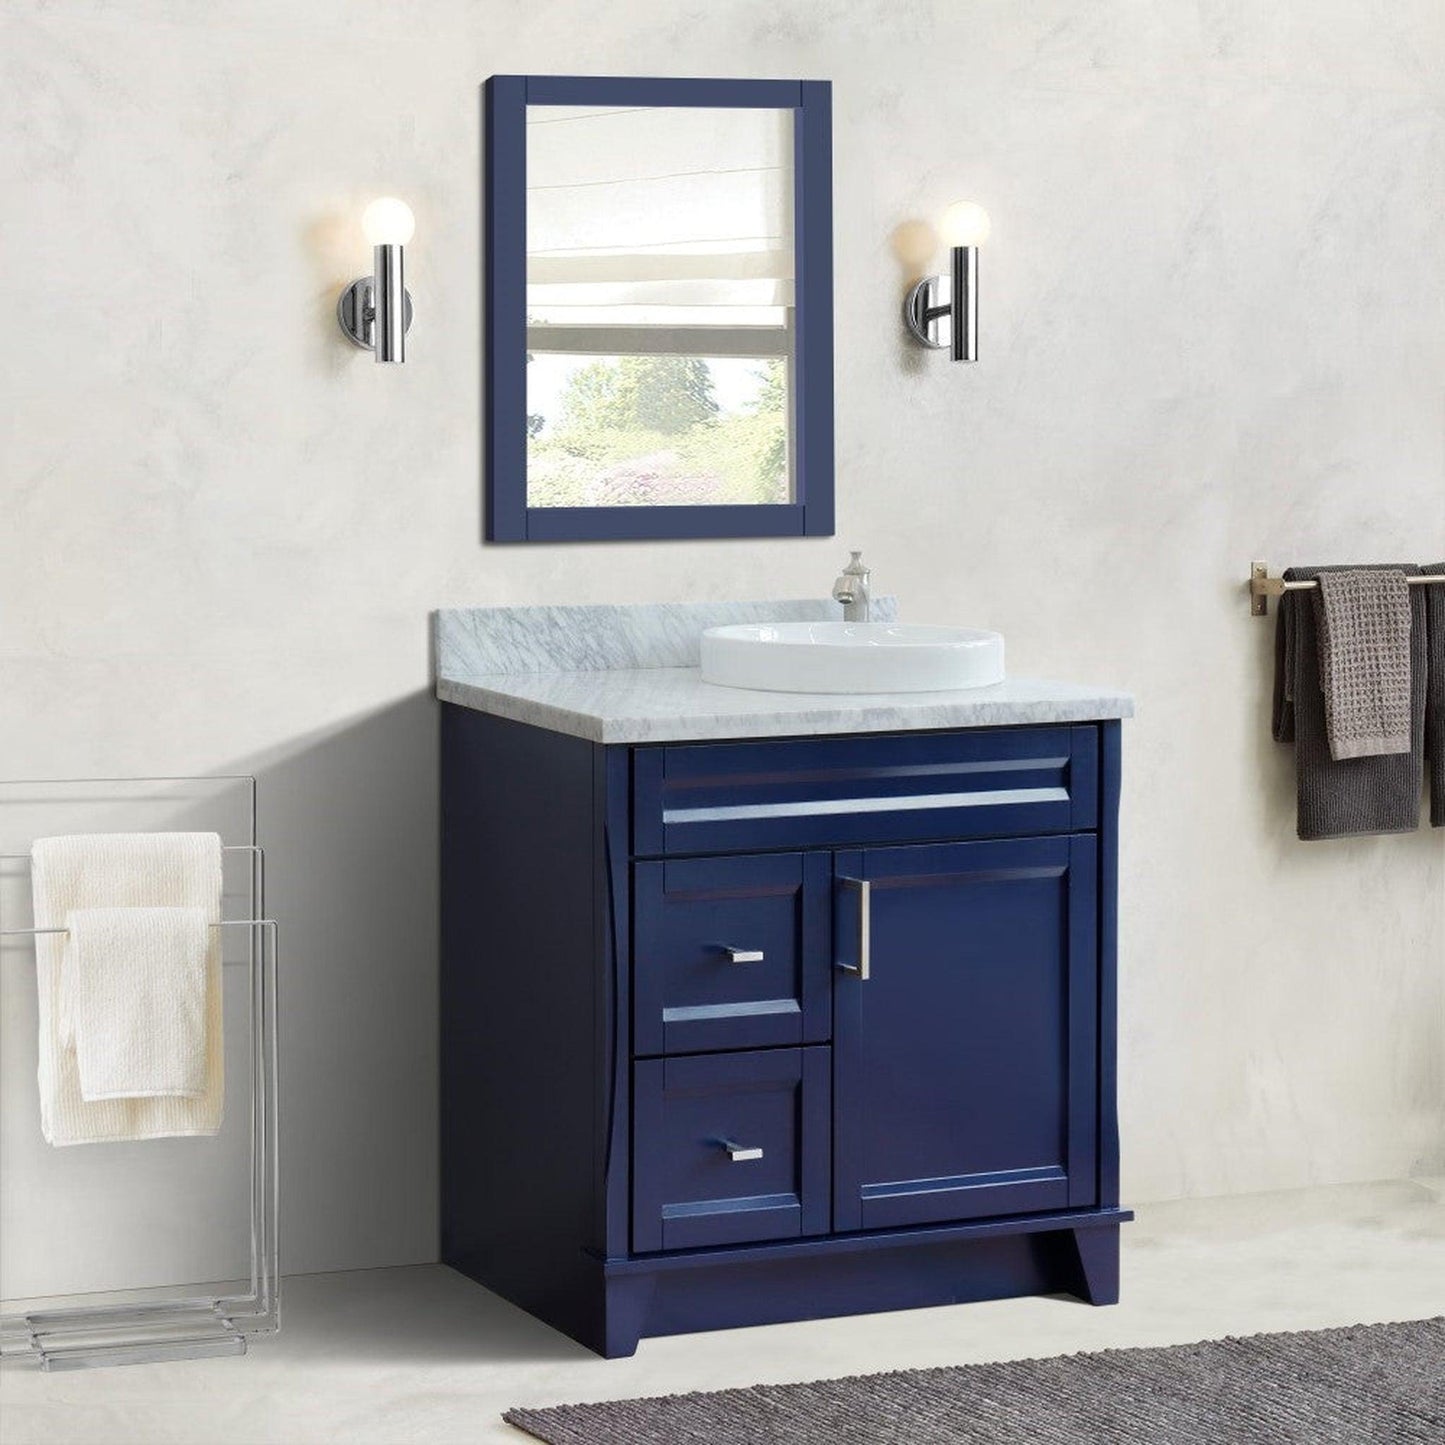 Bellaterra Home Terni 37" 1-Door 2-Drawer Blue Freestanding Vanity Set With Ceramic Right Offset Vessel Sink and White Carrara Marble Top, and Right Door Base